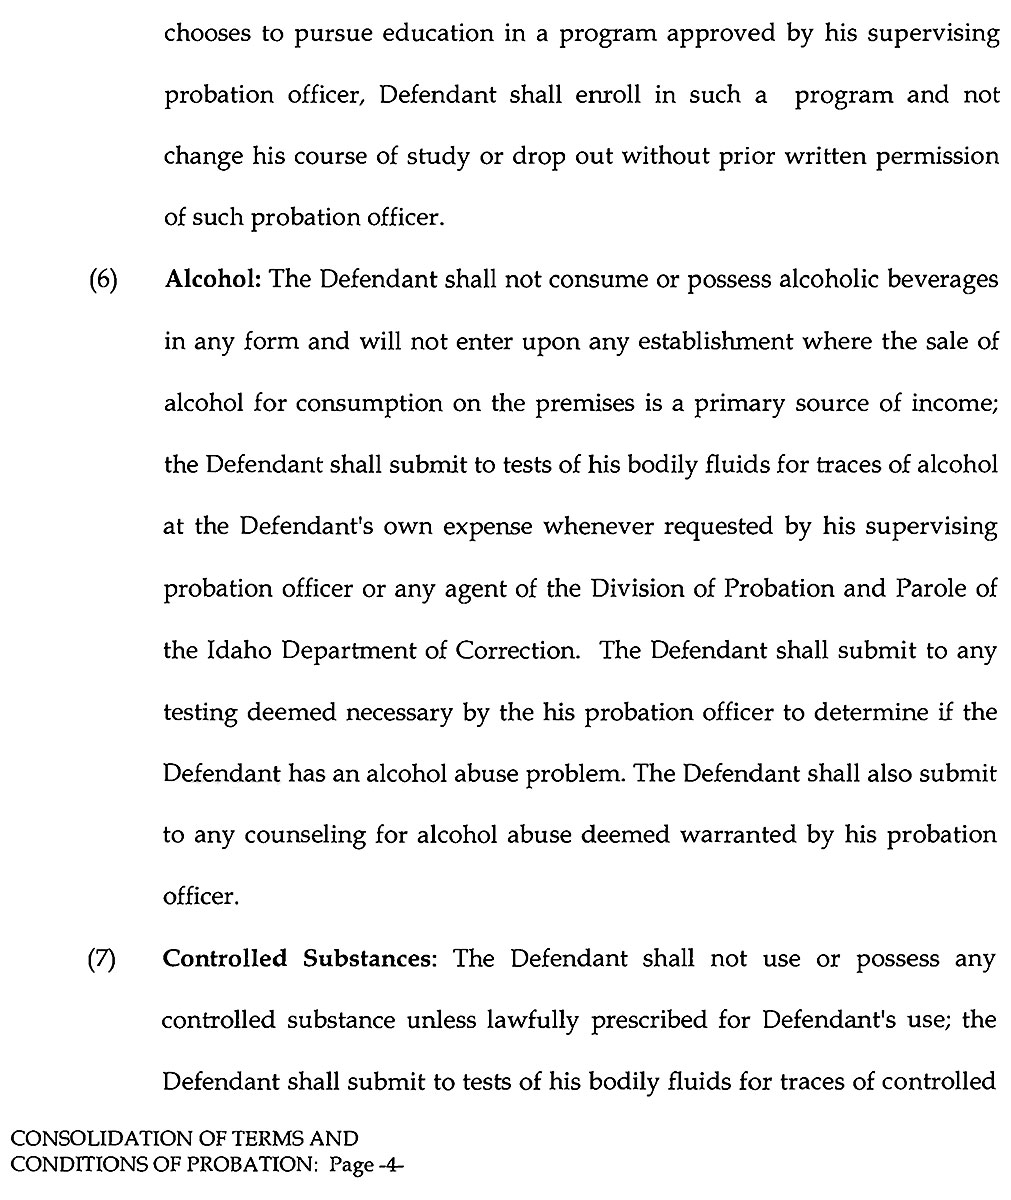 Consolidation of Terms and Conditions of Probation page 4